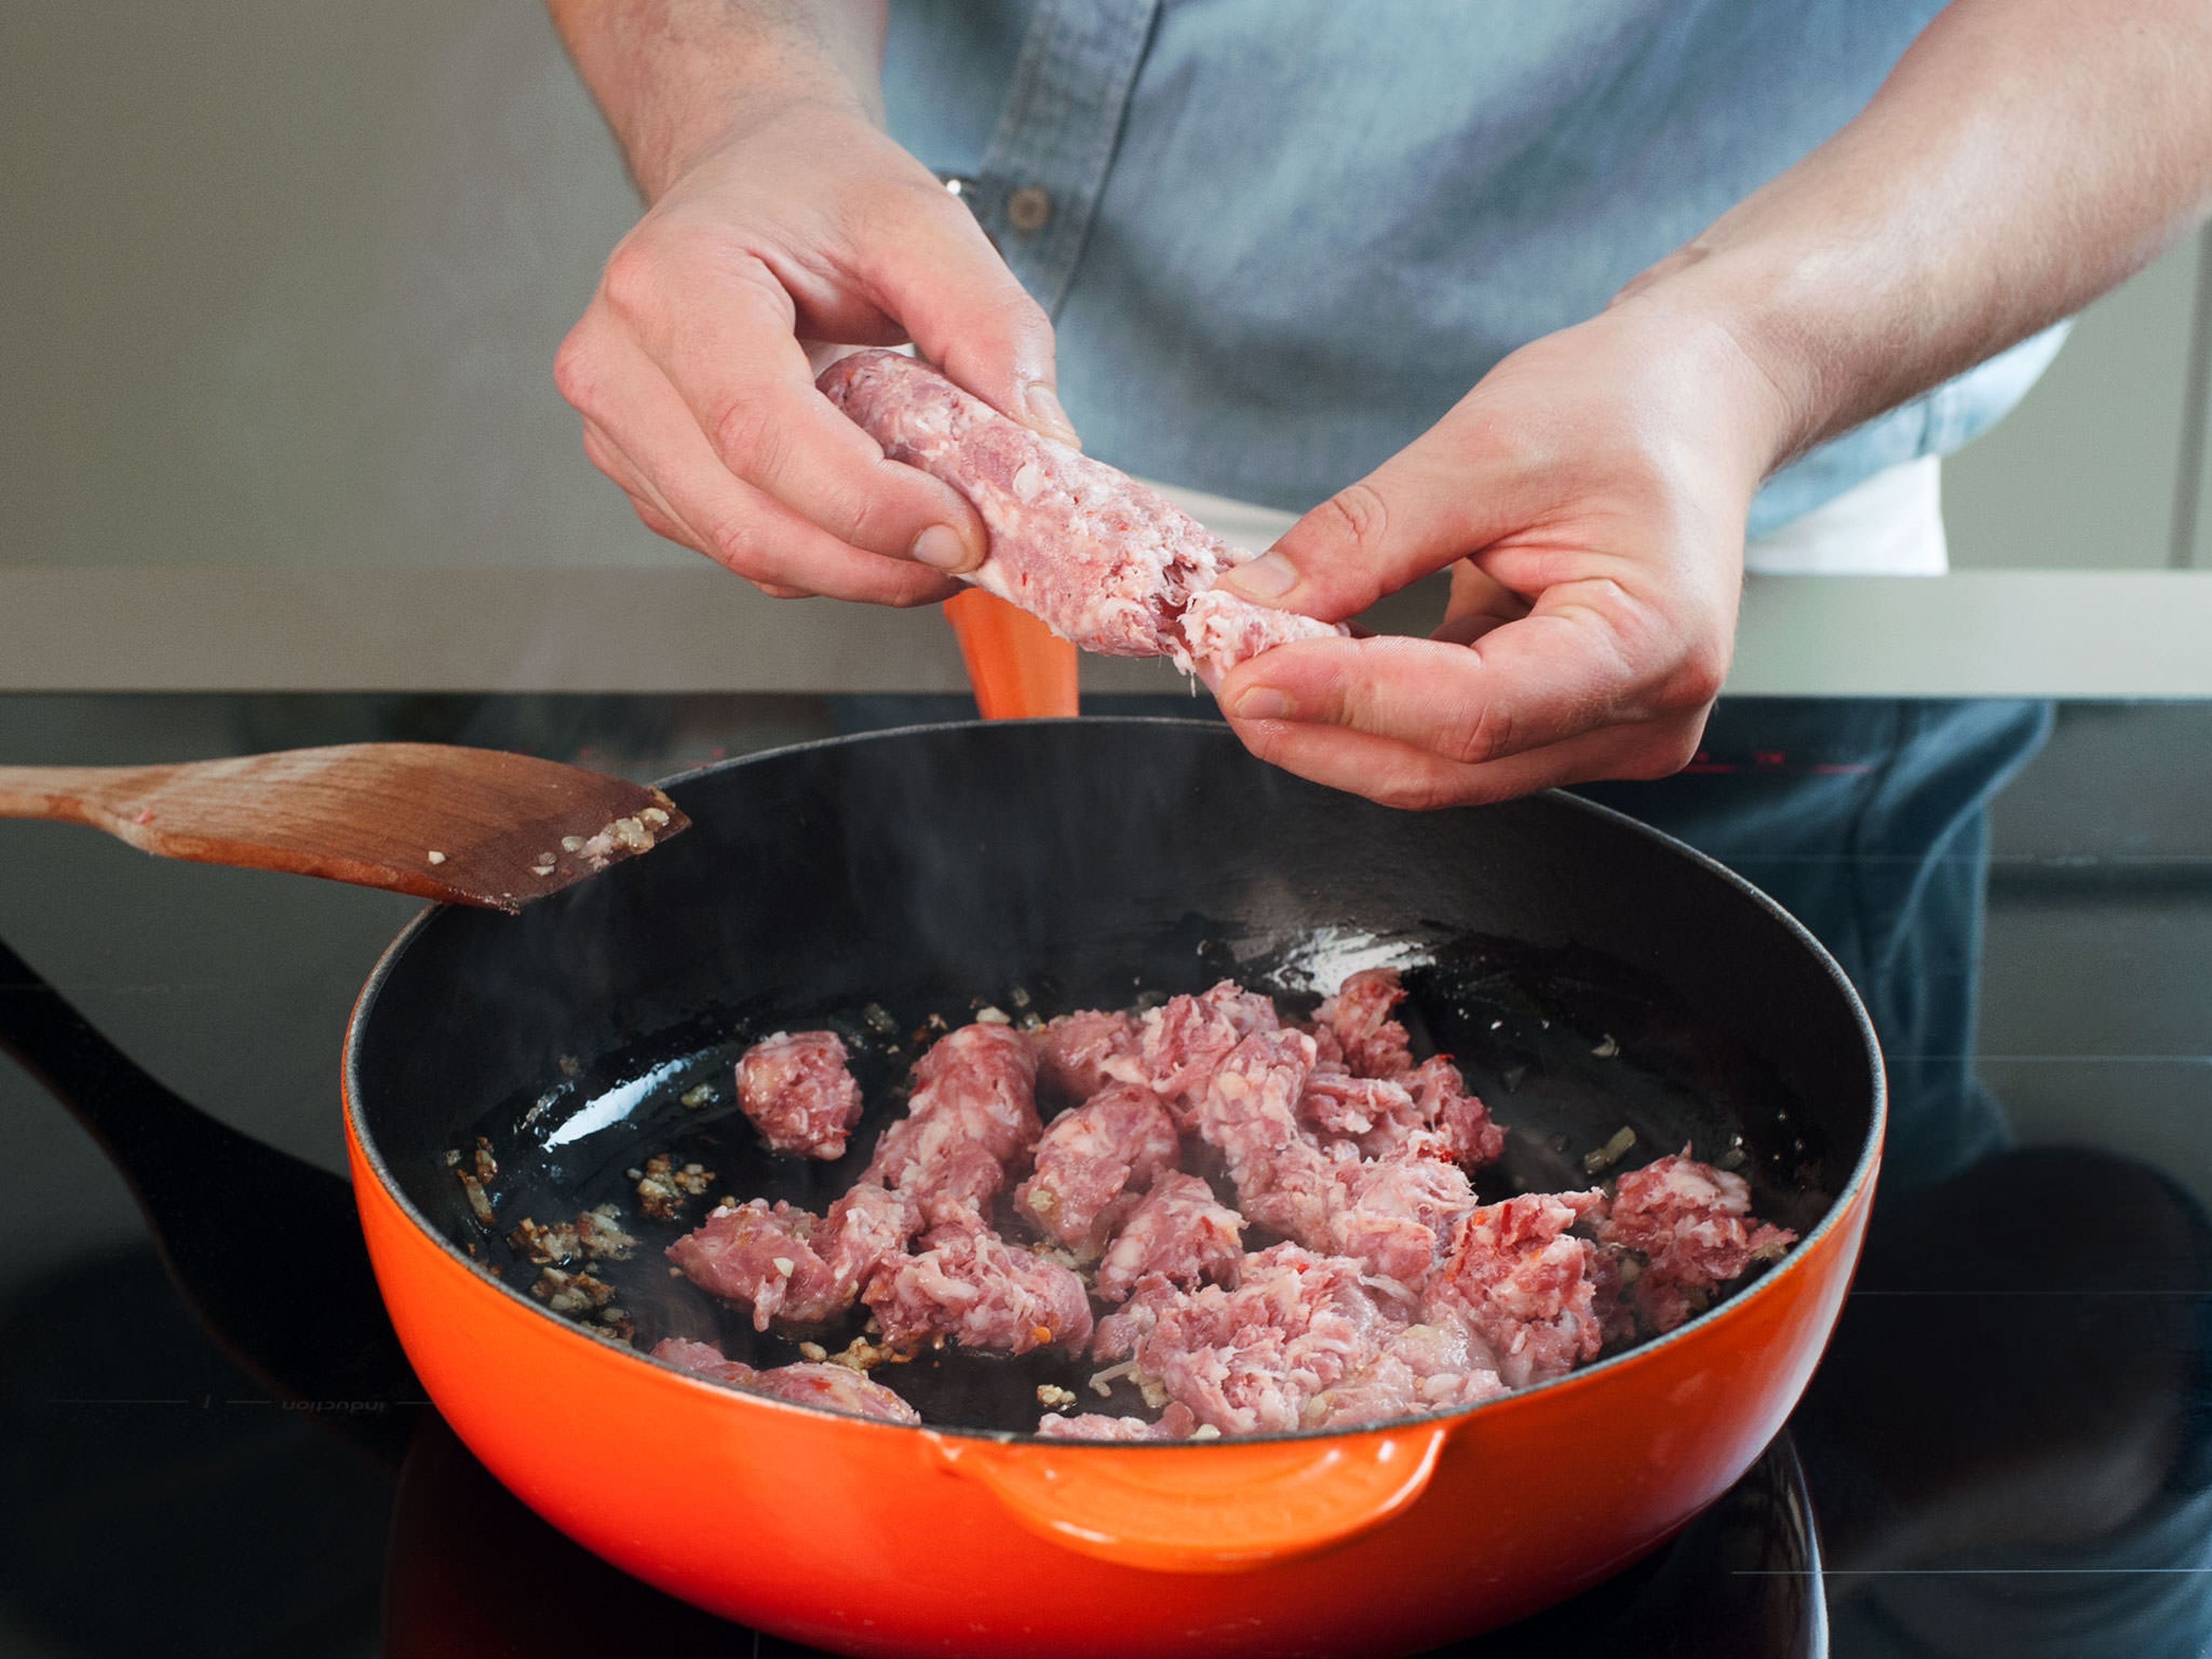 Crumble salsiccia into pan and sauté, stirring occasionally, for approx. 3 – 5 min. until browned. Take care to not let the salsiccia stick to the bottom of the pan.